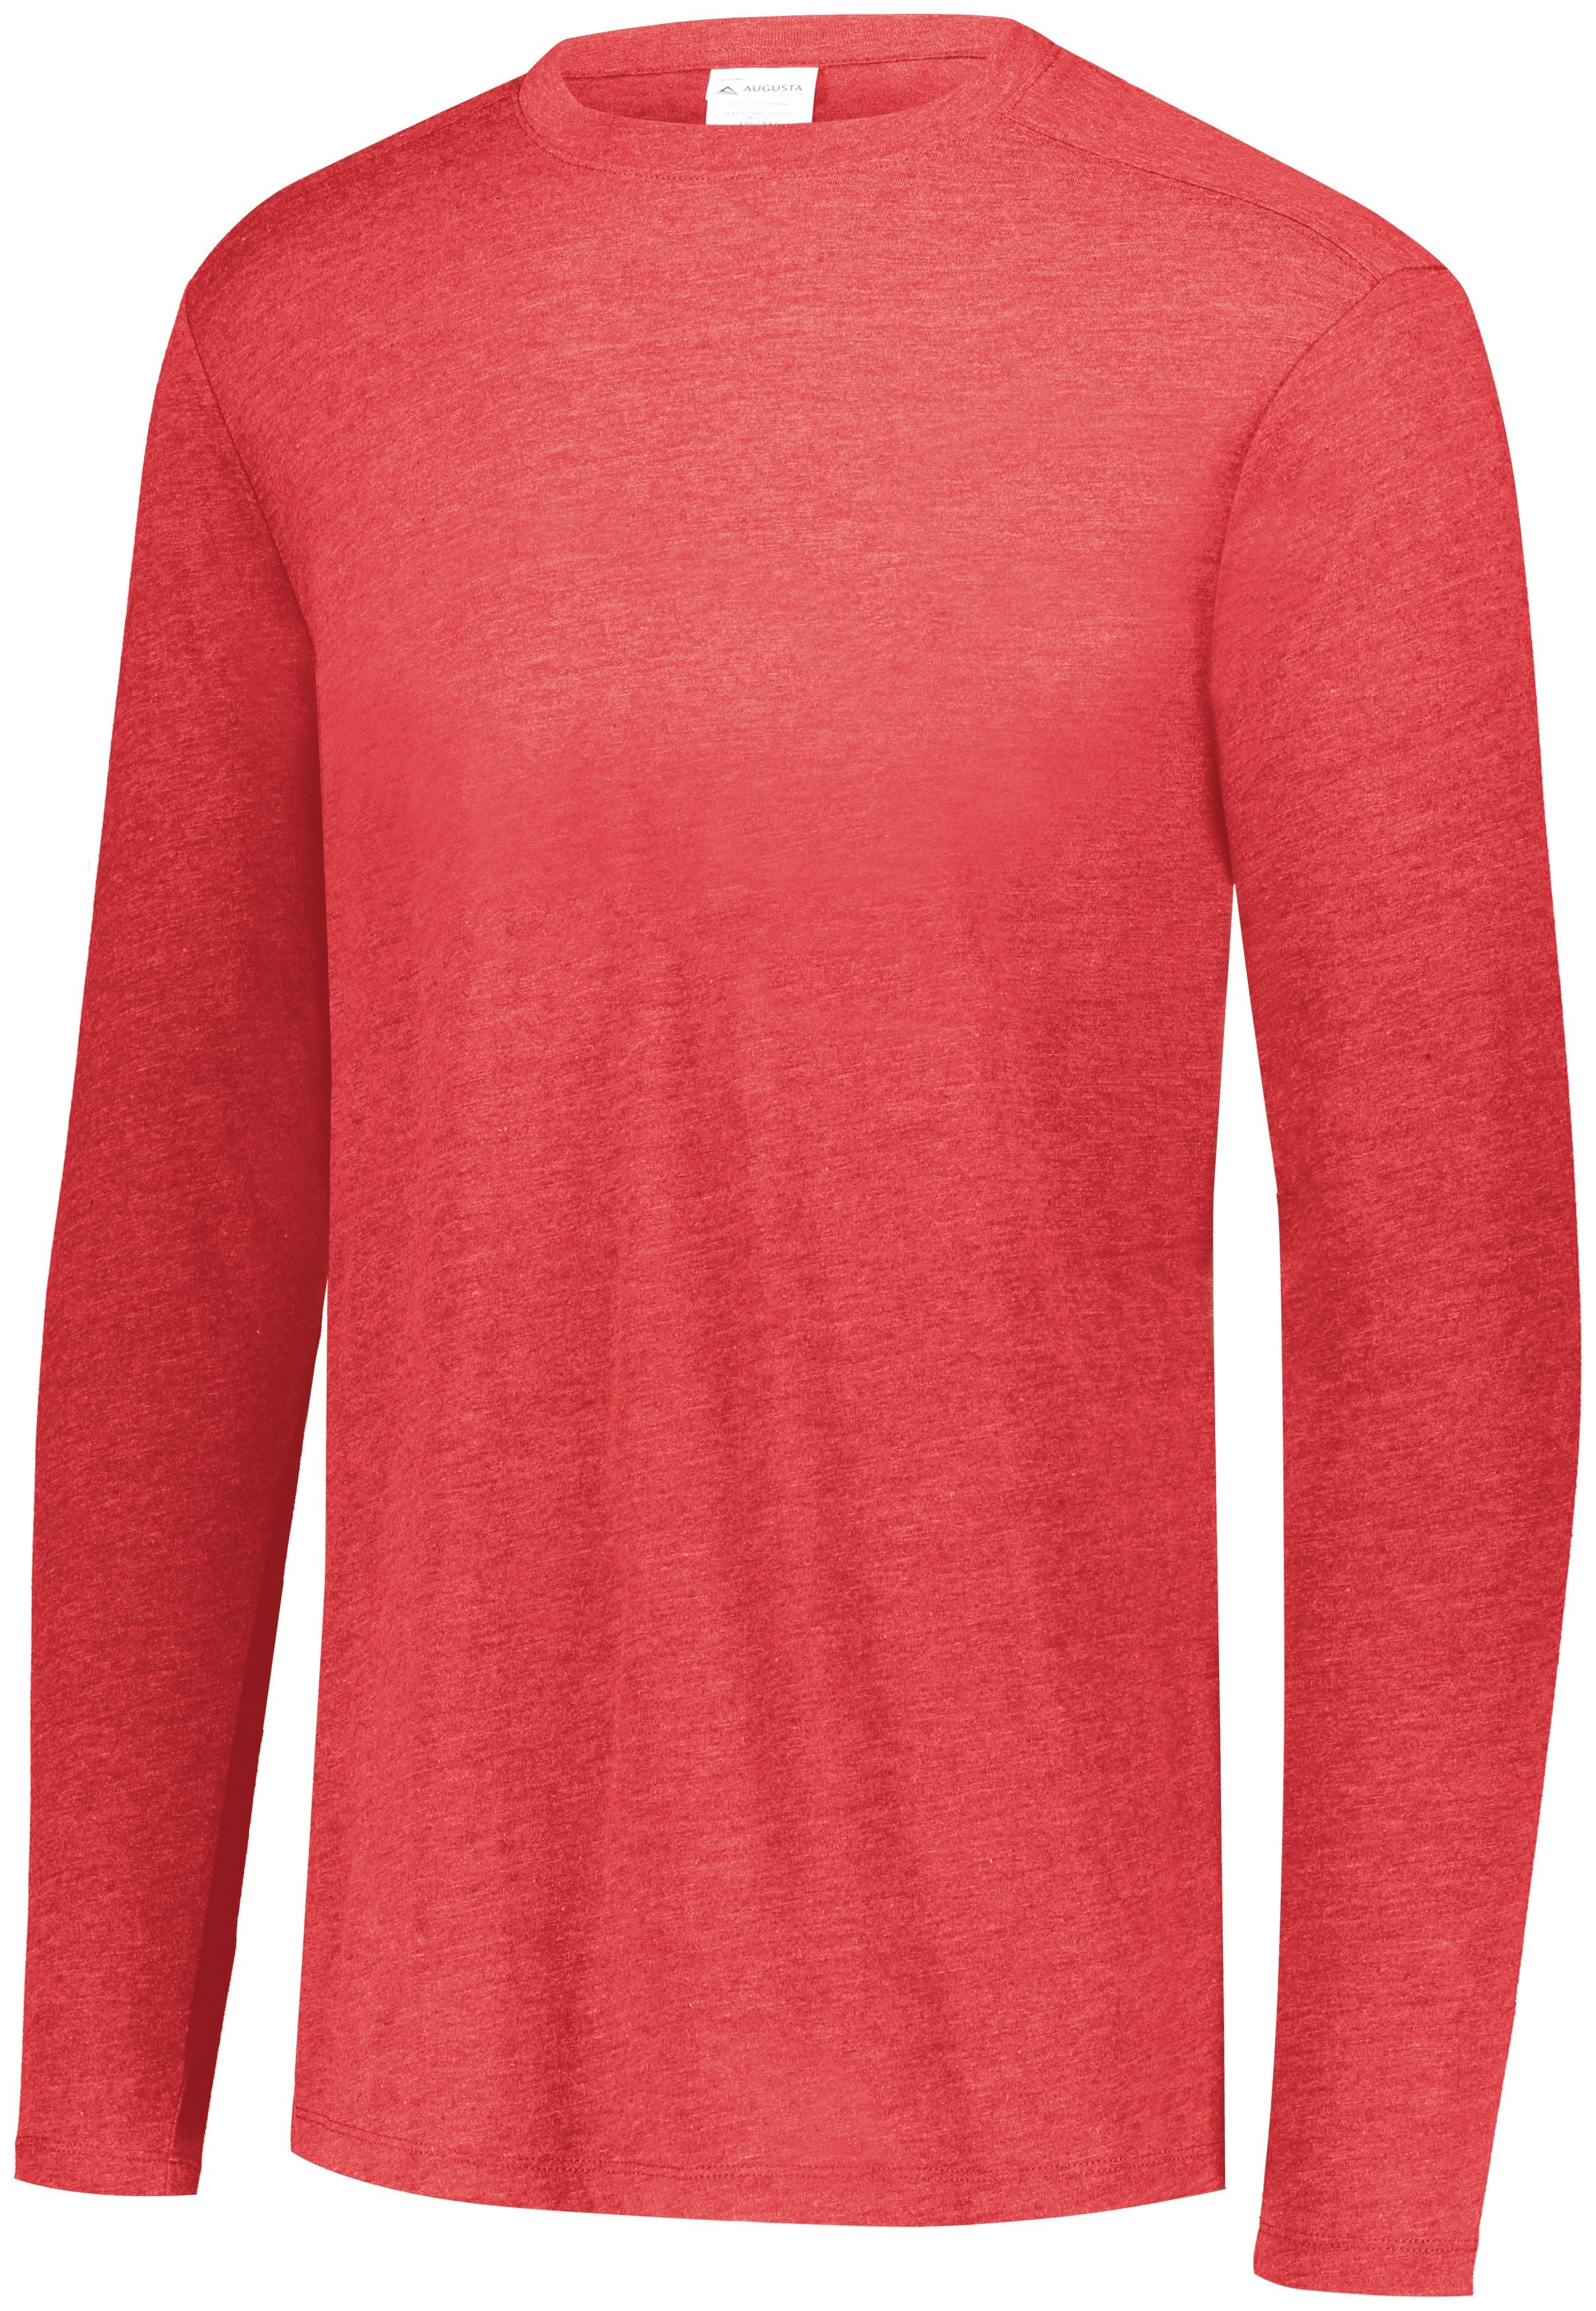 Augusta Sportswear Youth Tri-Blend Long Sleeve Crew in Red Heather  -Part of the Youth, Augusta-Products product lines at KanaleyCreations.com